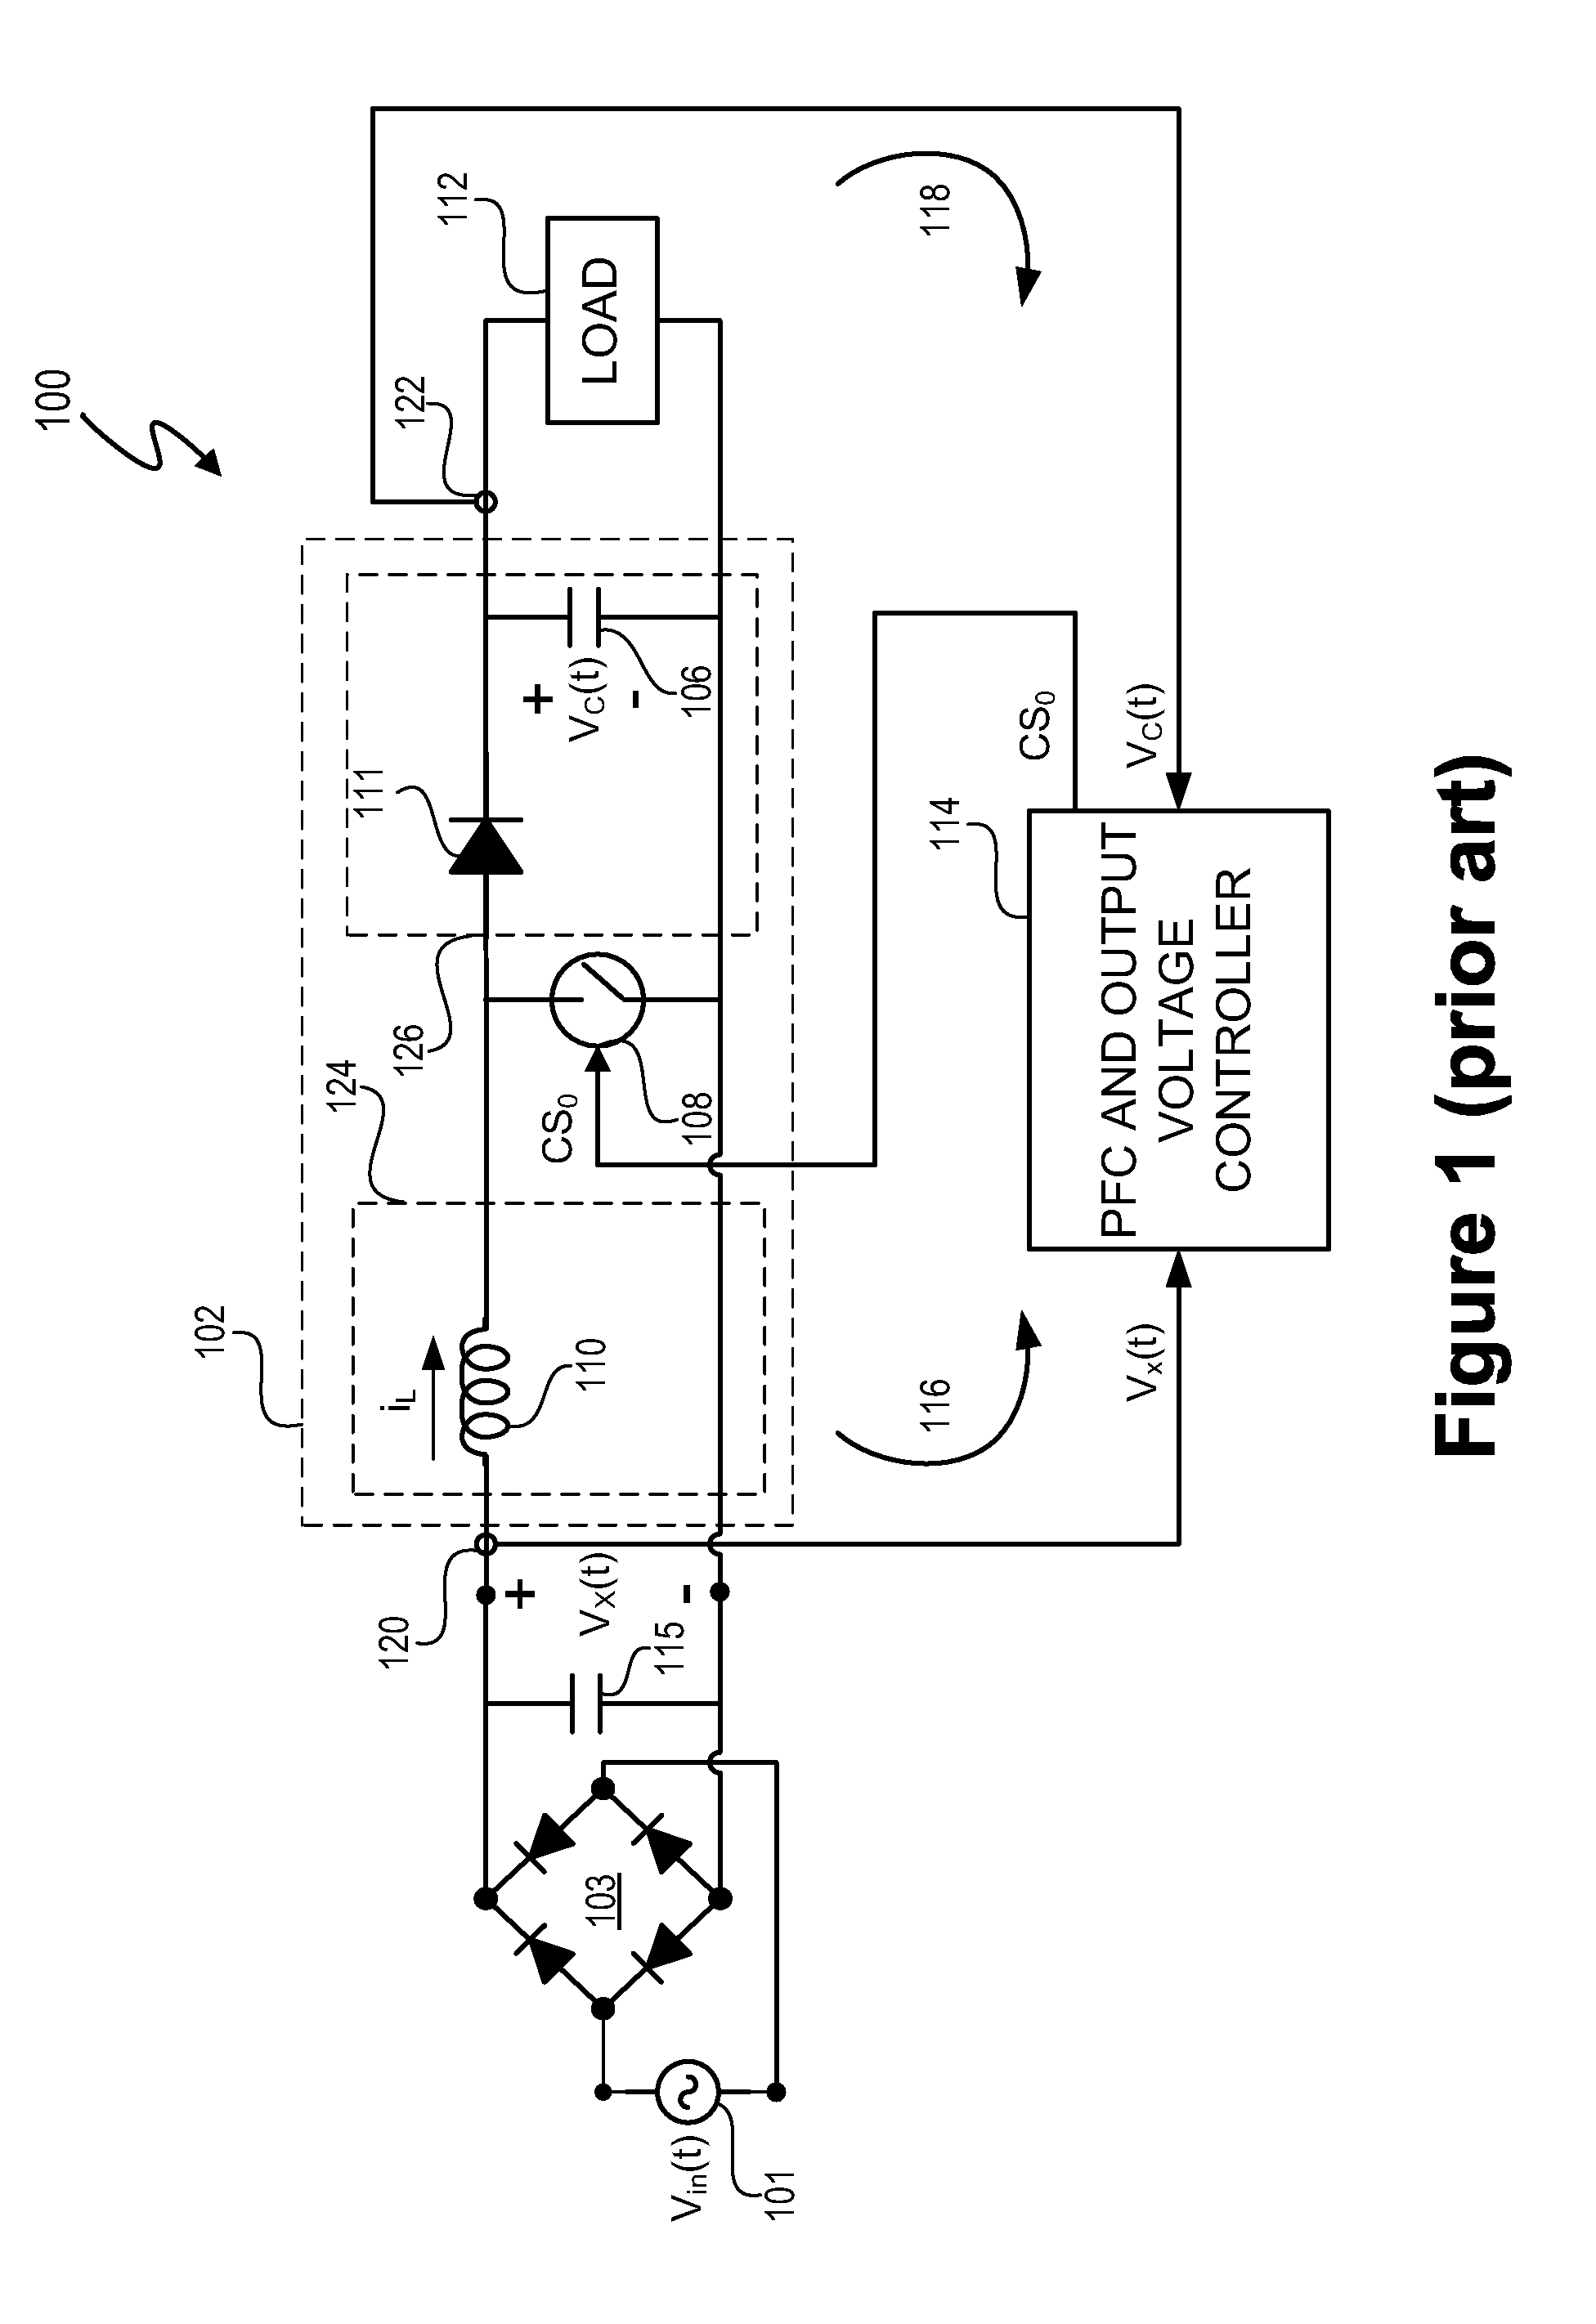 Programmable power control system